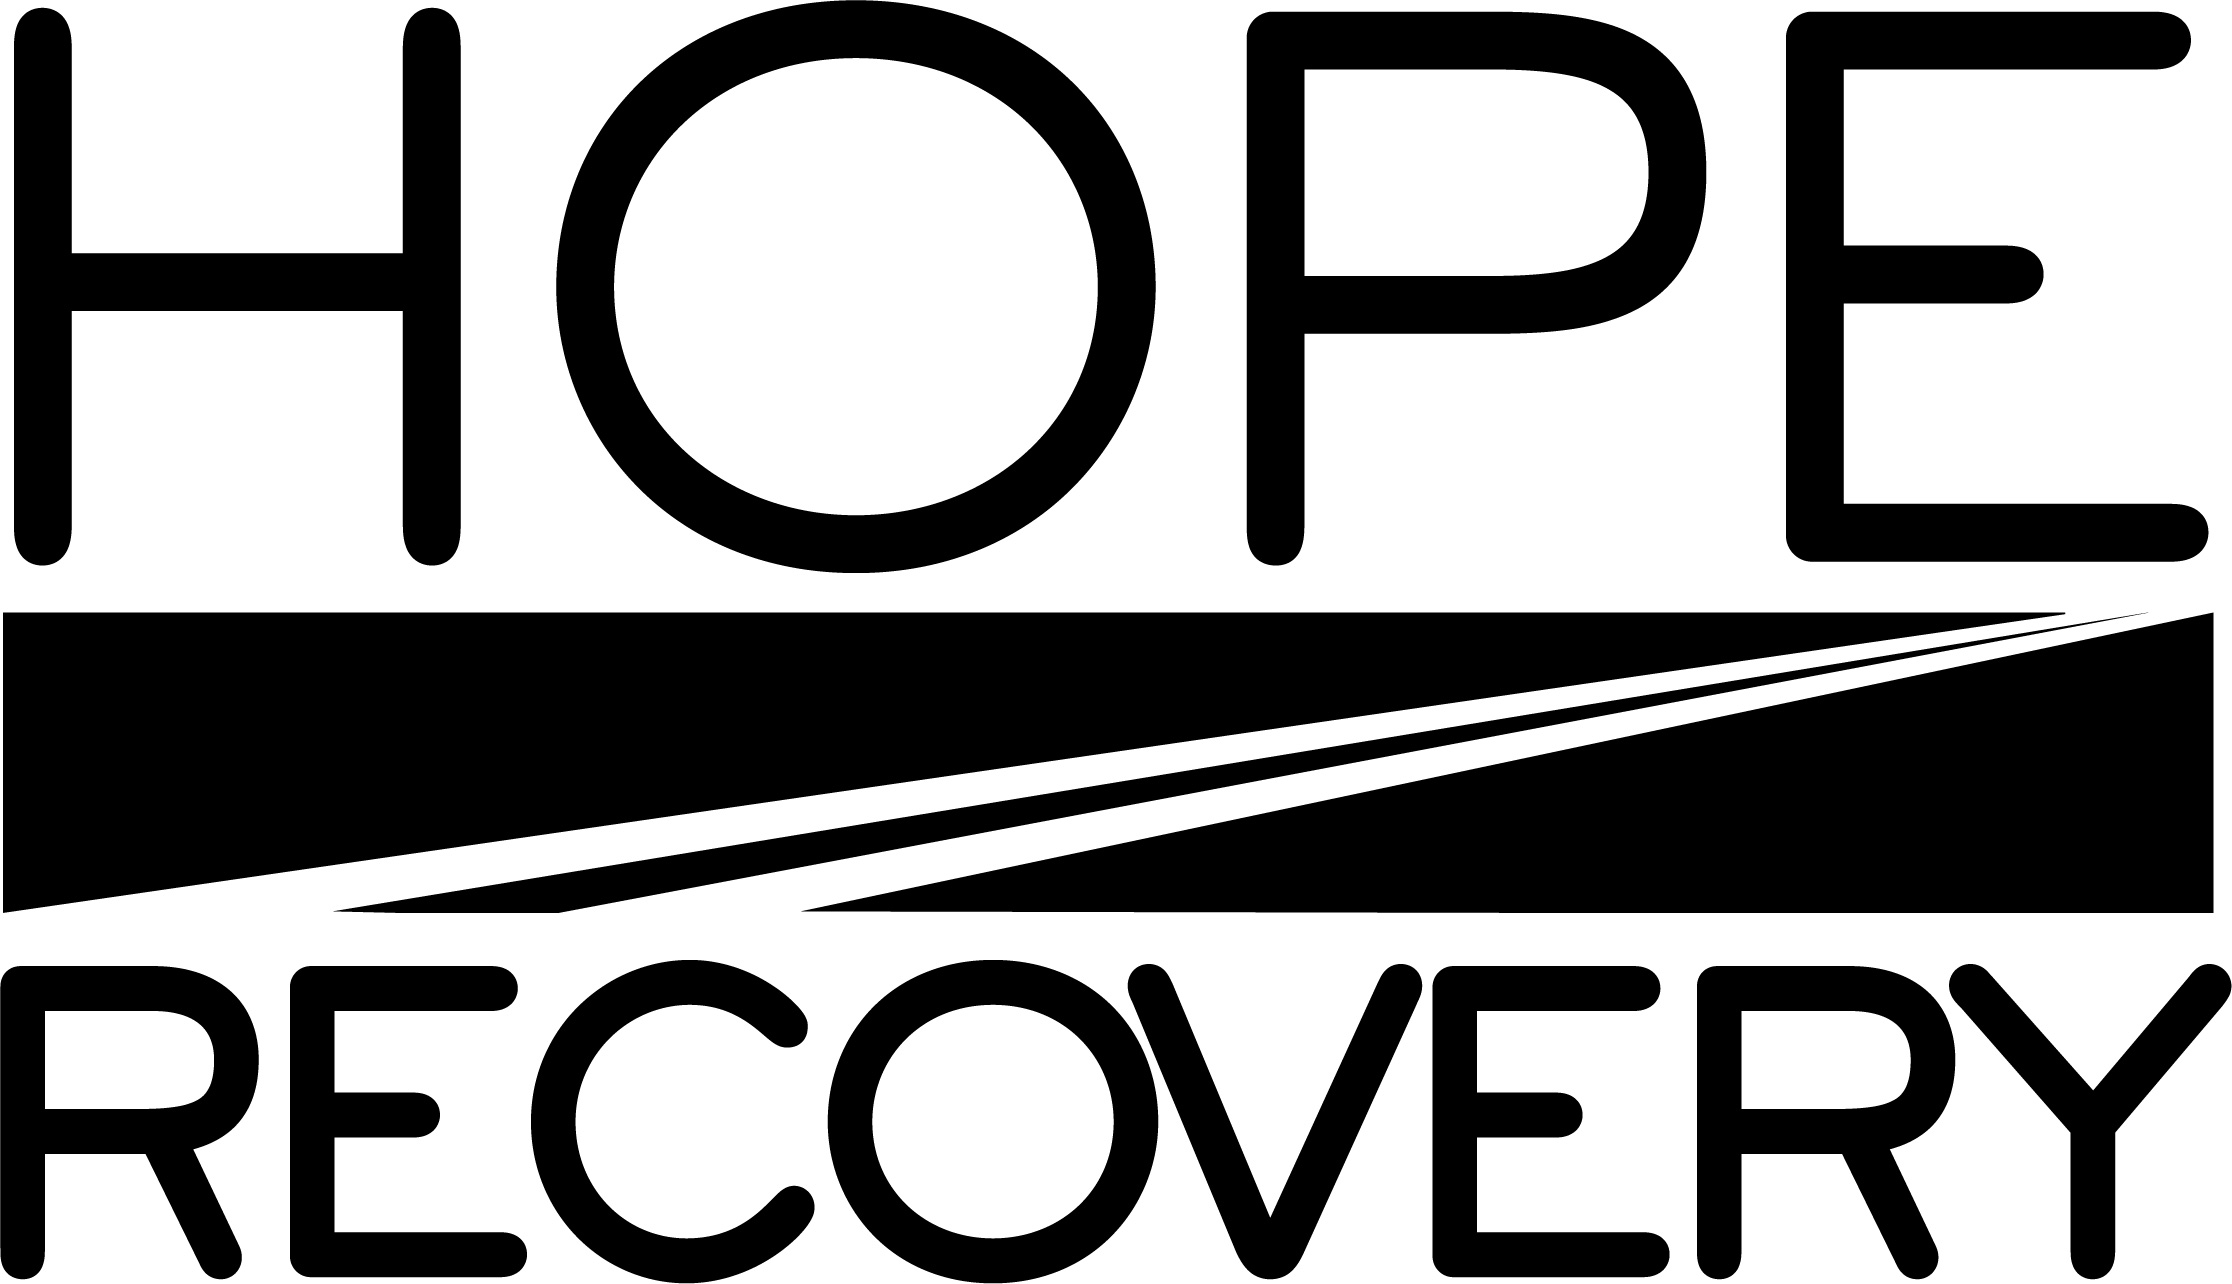 Logo Design Contest for RECOVERYSHOP.COM or Recovery Shop - (Design must  reflect that we are a addiction-recovery, not computer, sports recovery  etc.) | Hatchwise